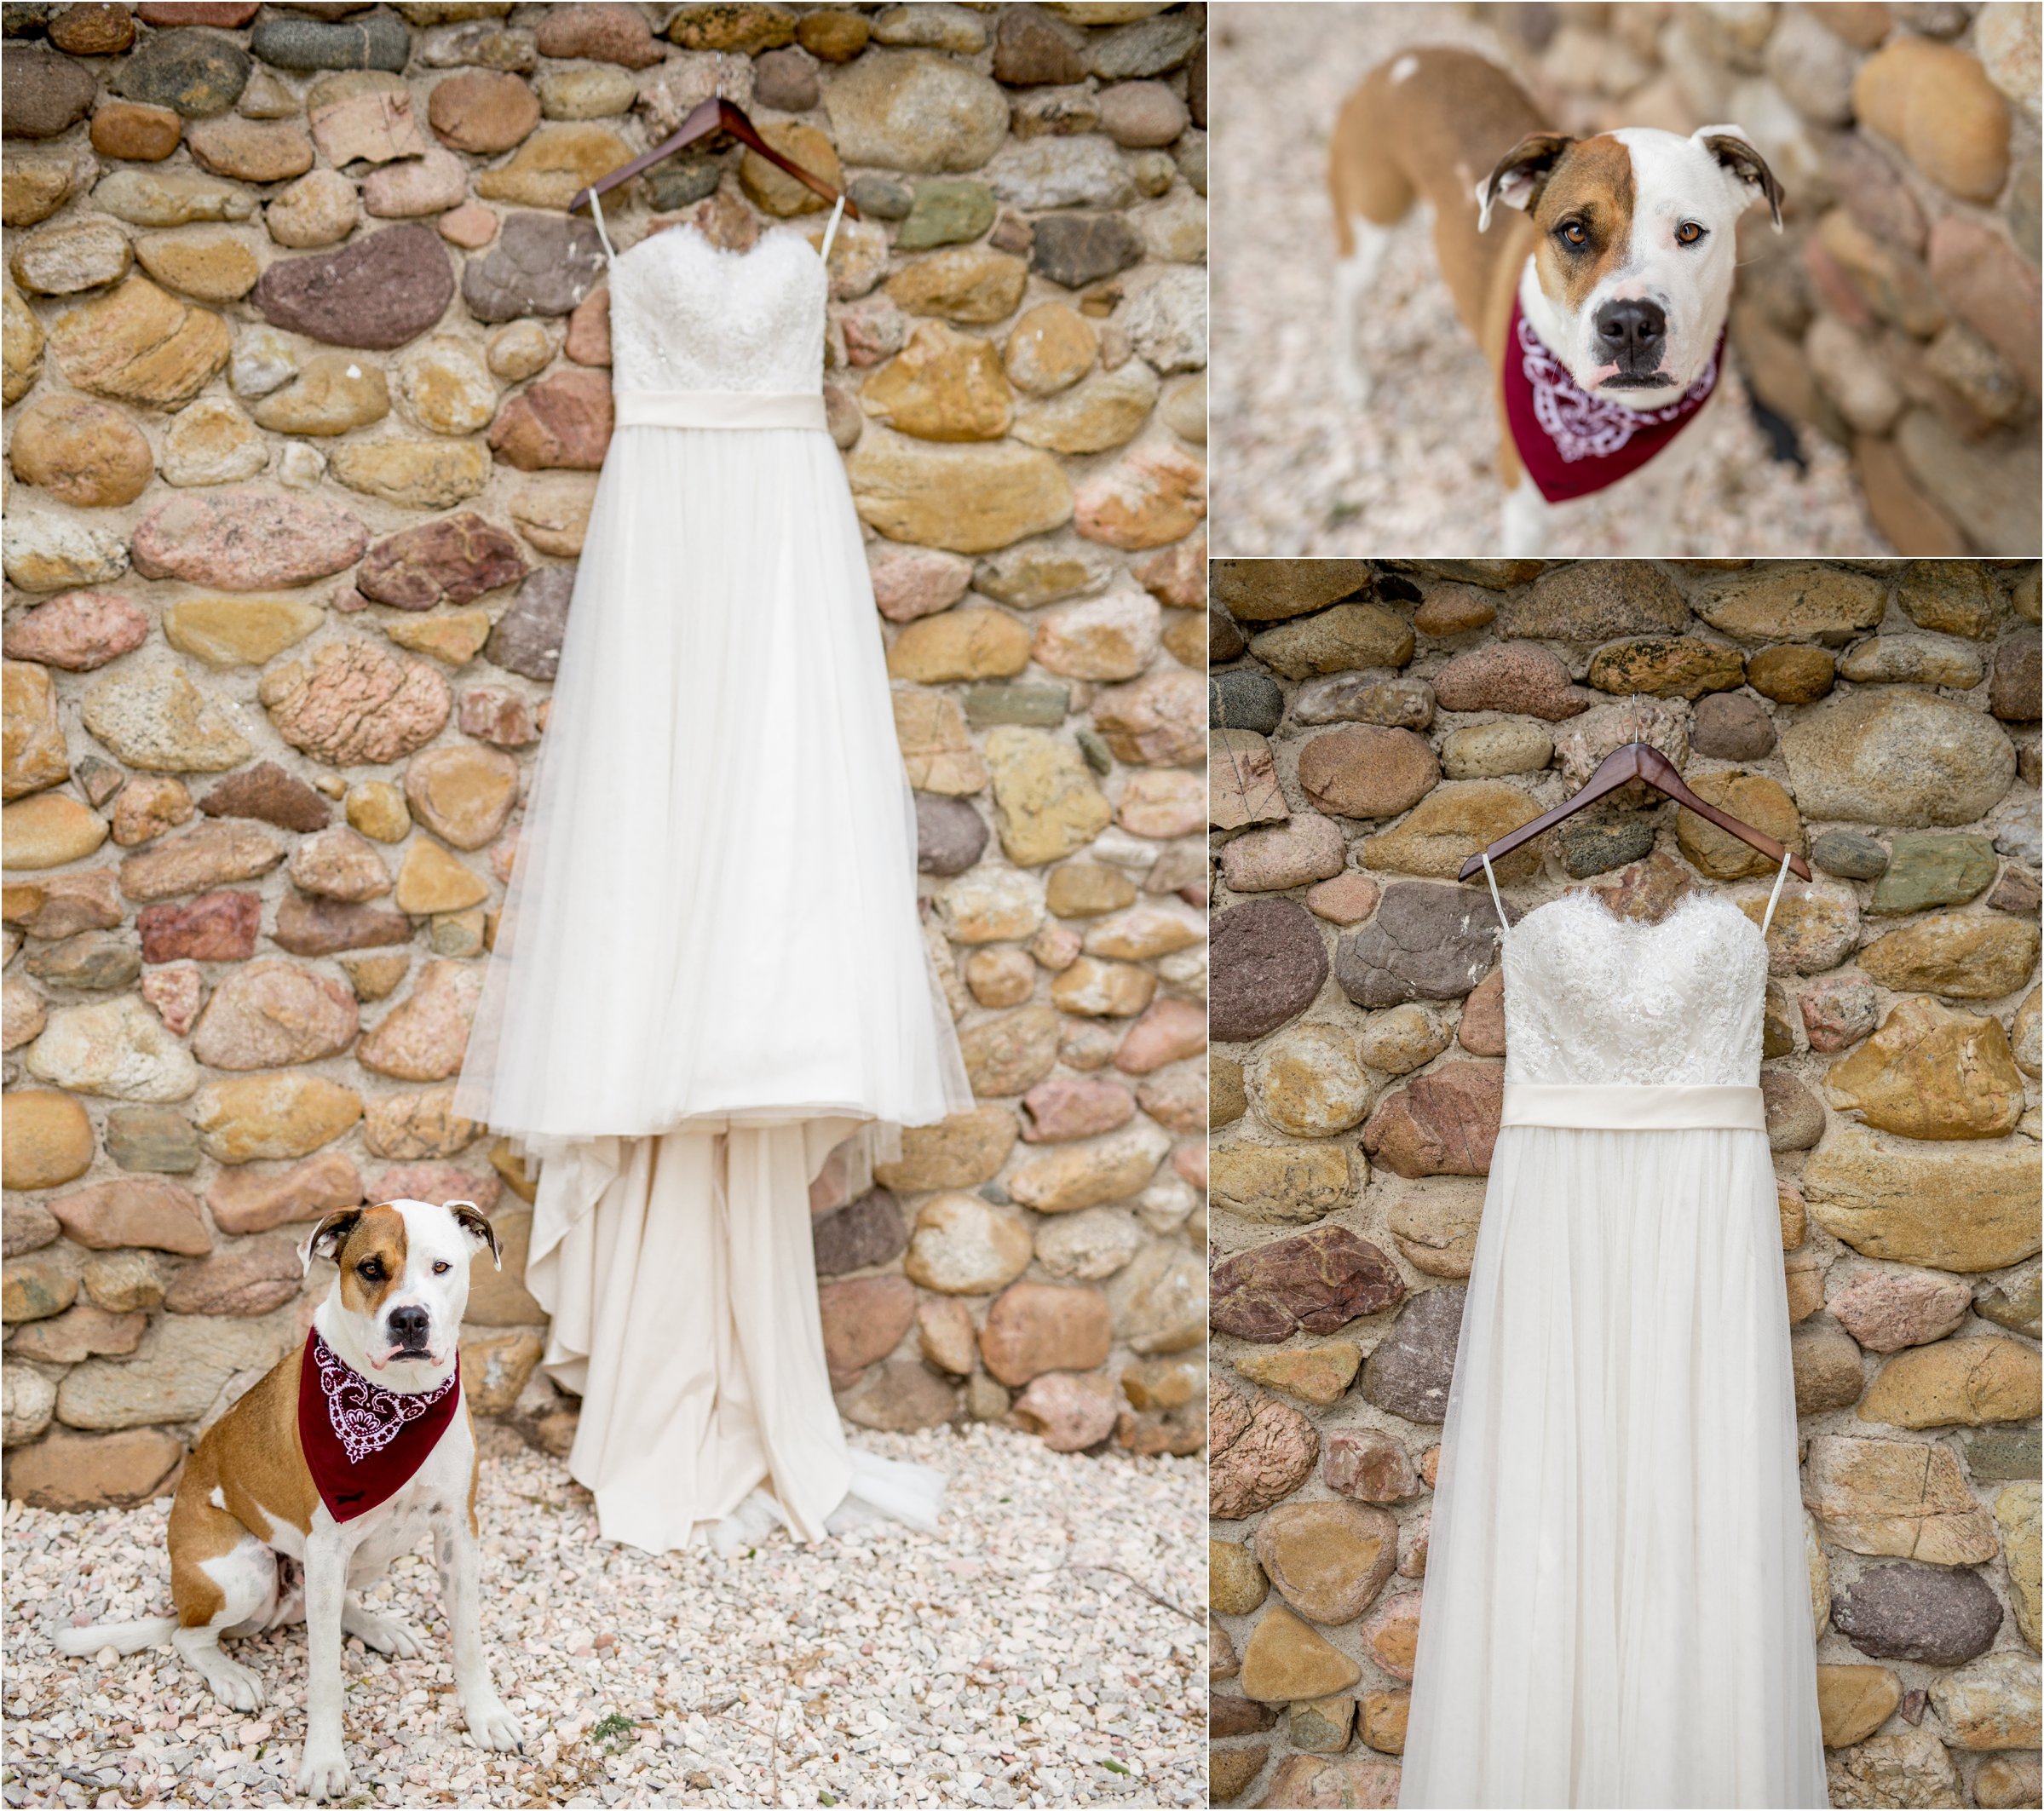 the bride's wedding dress along with the bride and groom's dog against a stone wall